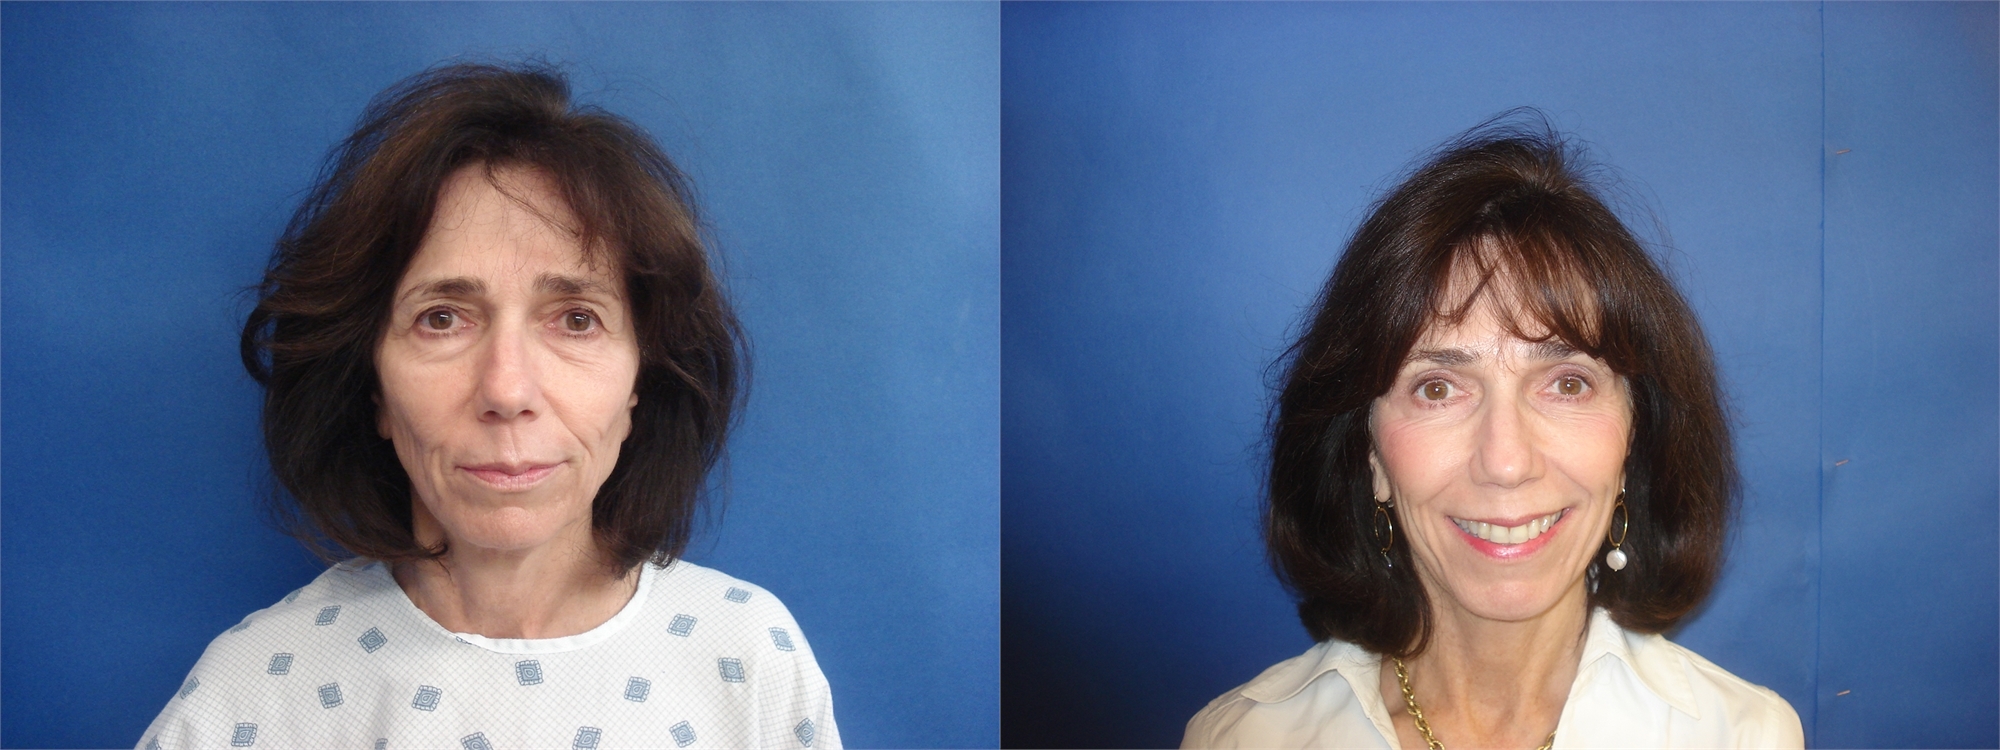 Facelift Before and After Surgery Tacoma, WA